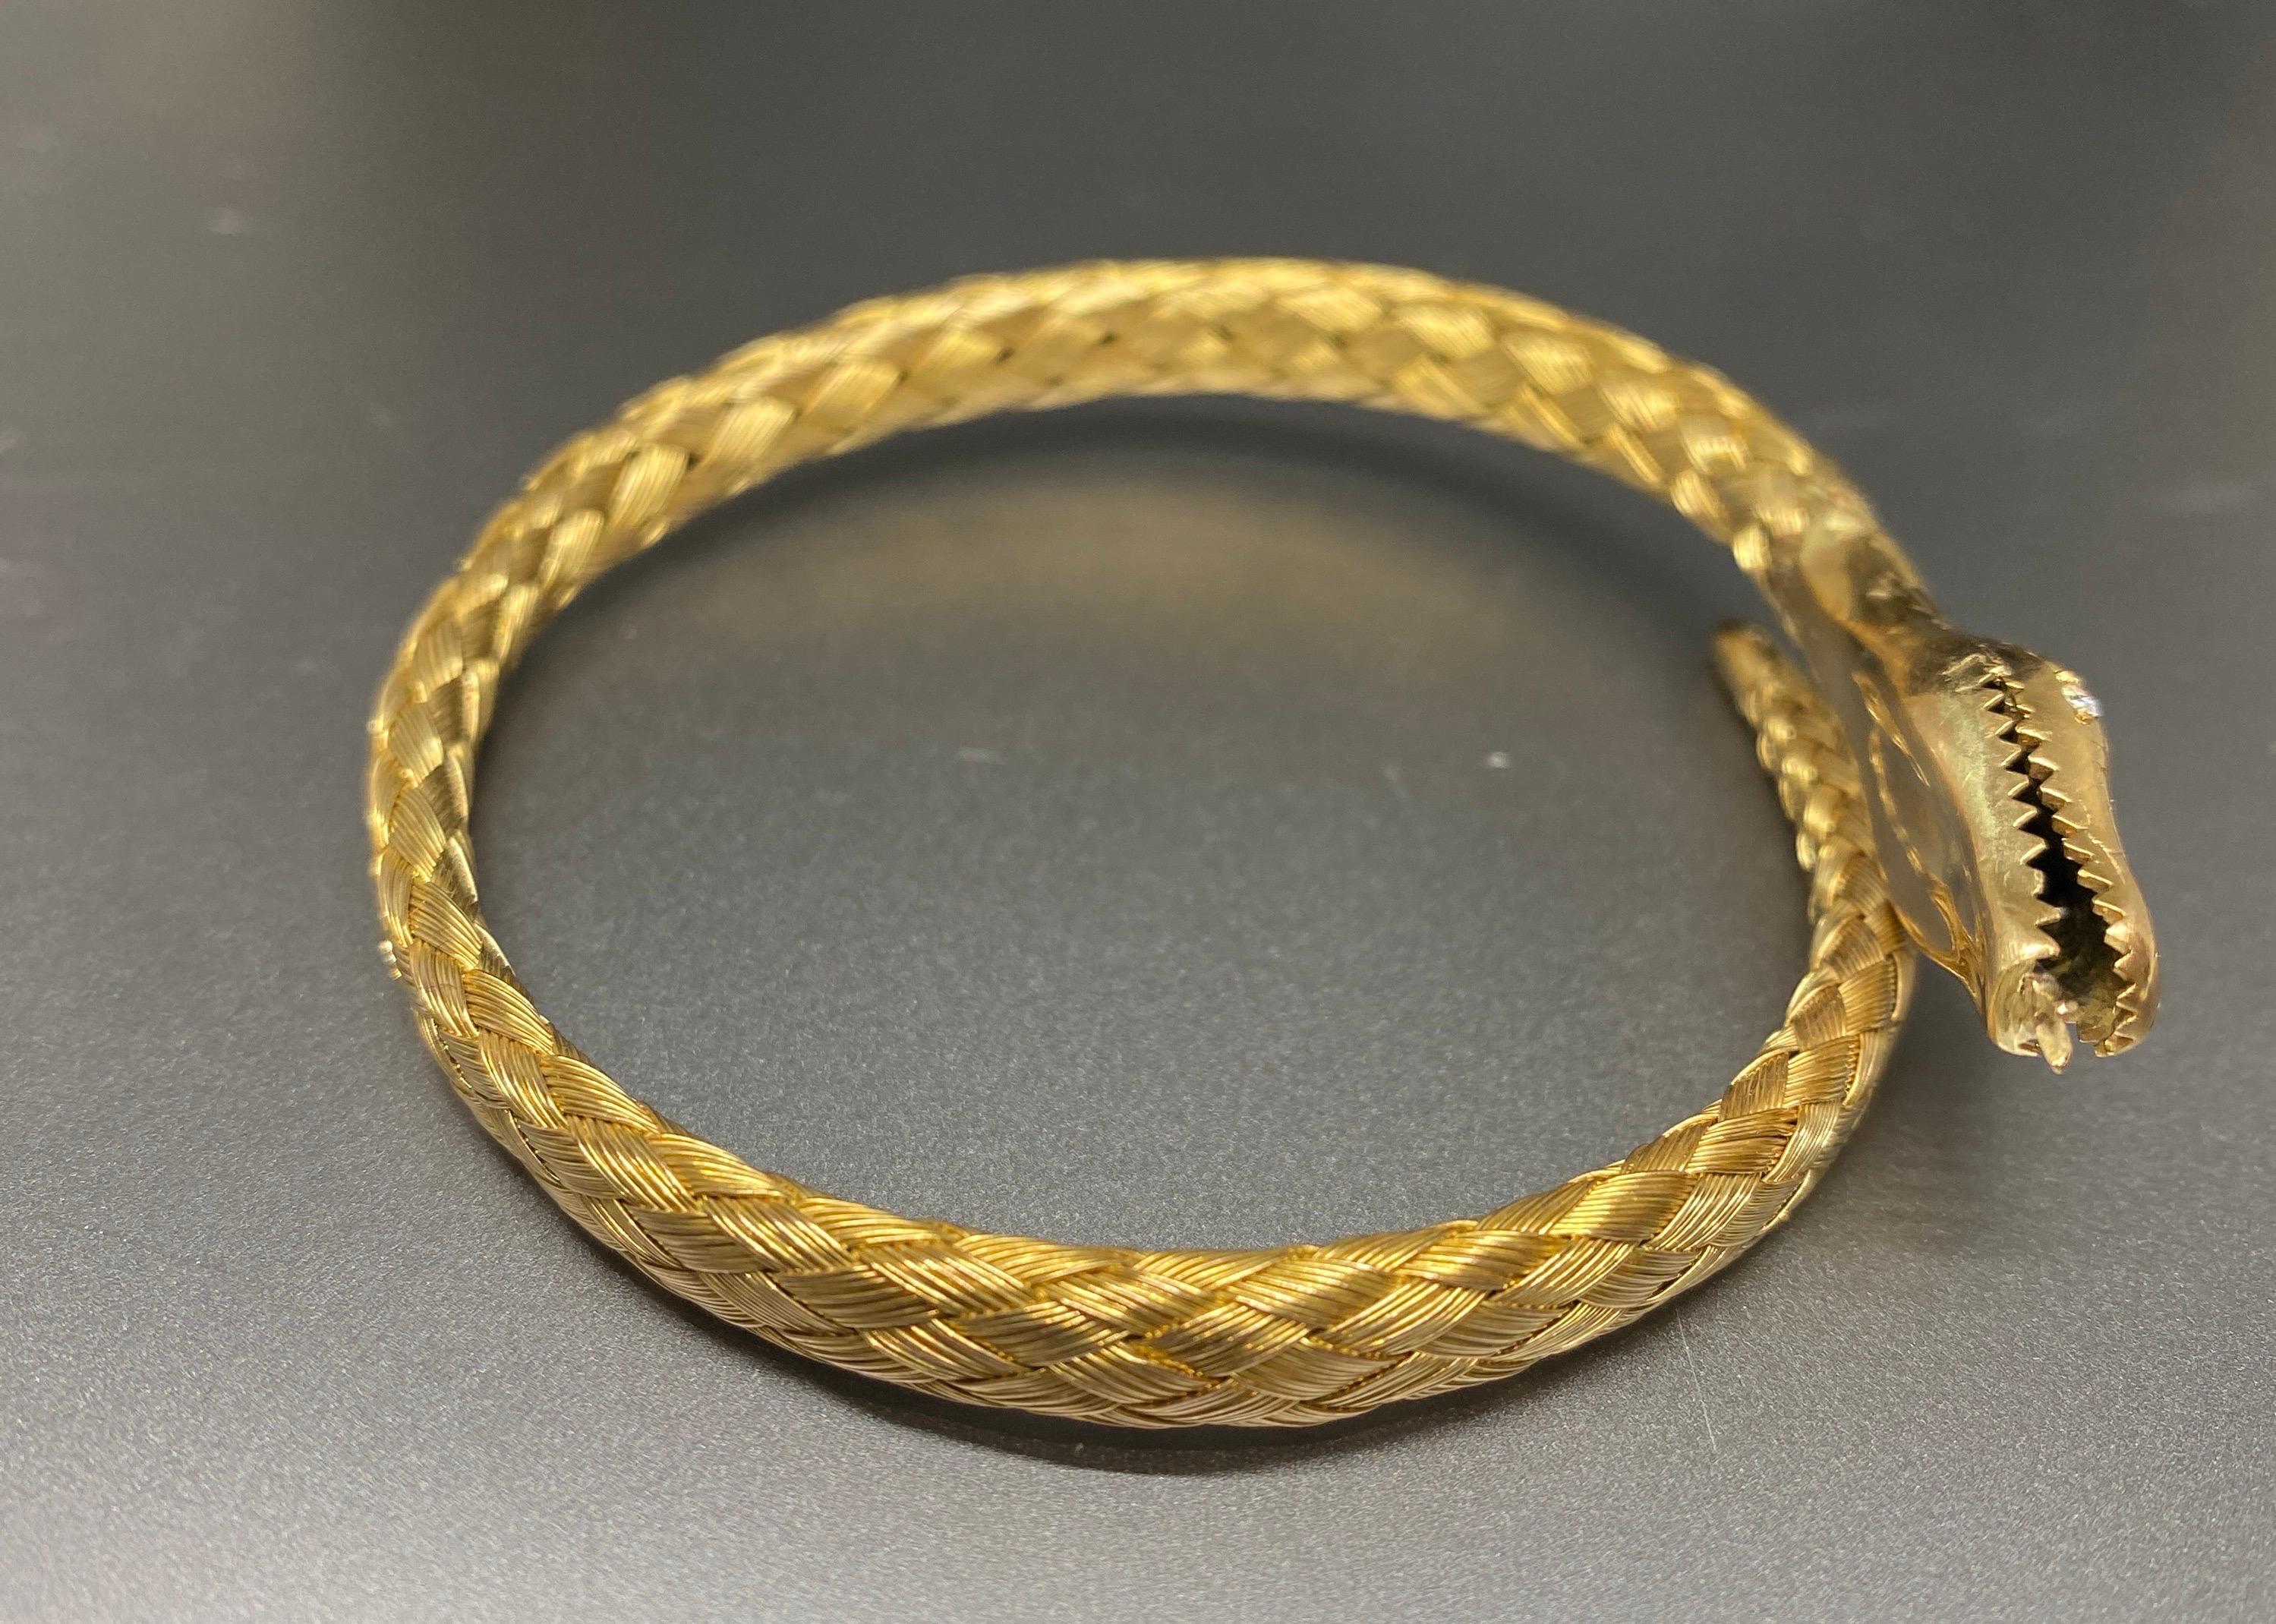 Antique Victorian 14k Yellow Gold Snake Woven Wrap Coil Bracelet In Good Condition For Sale In Bernardsville, NJ